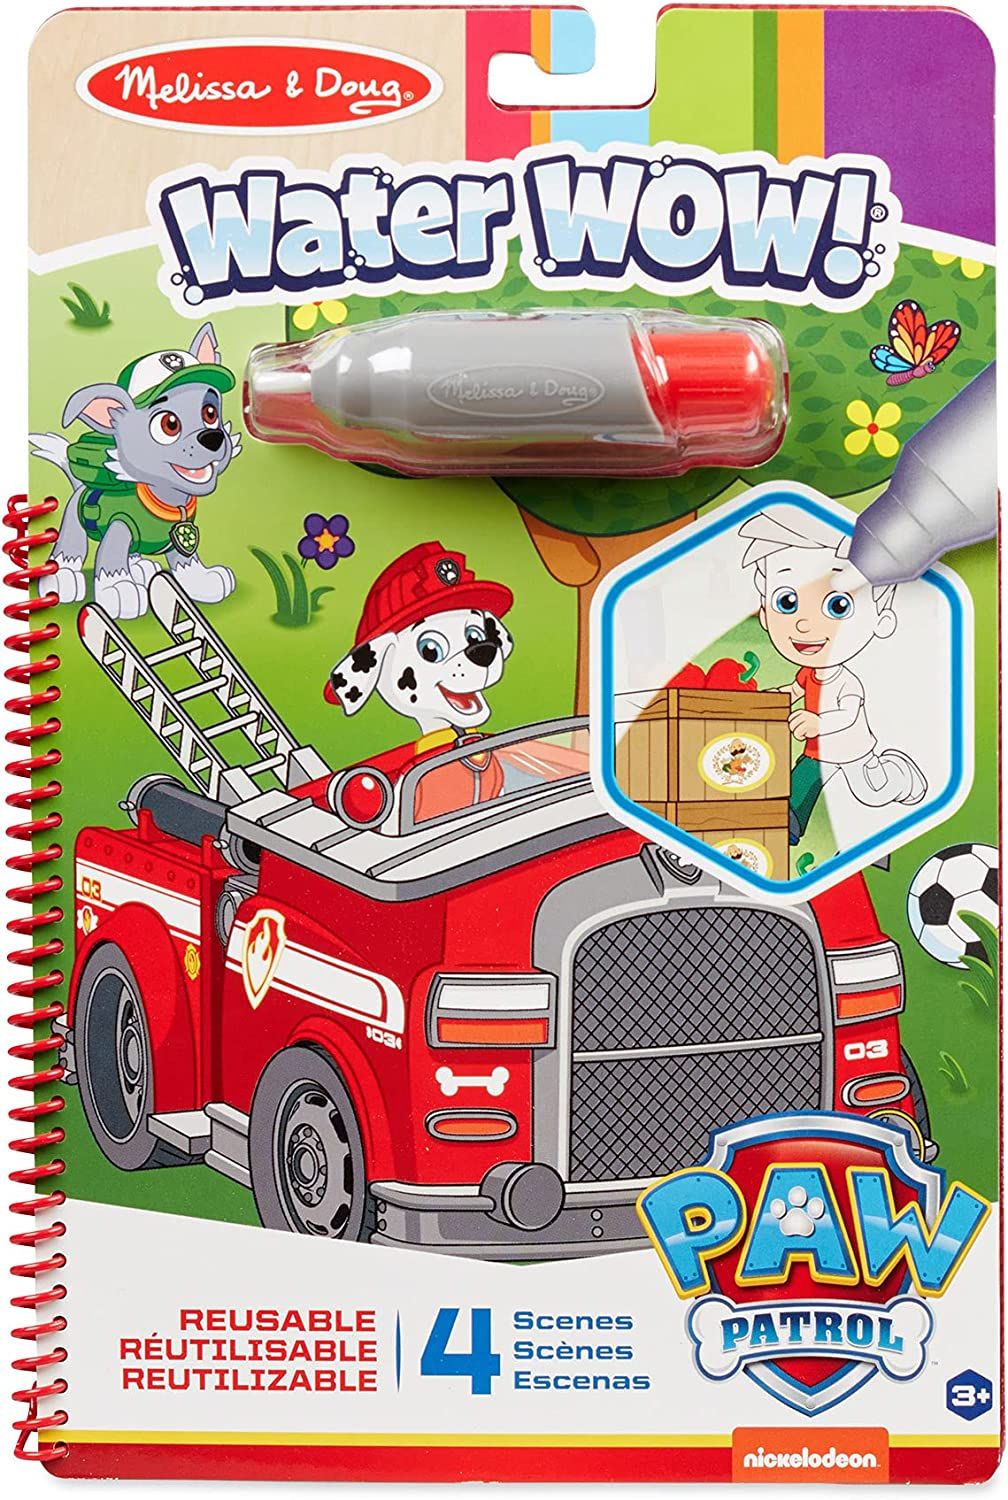 Paw patrol water wow book